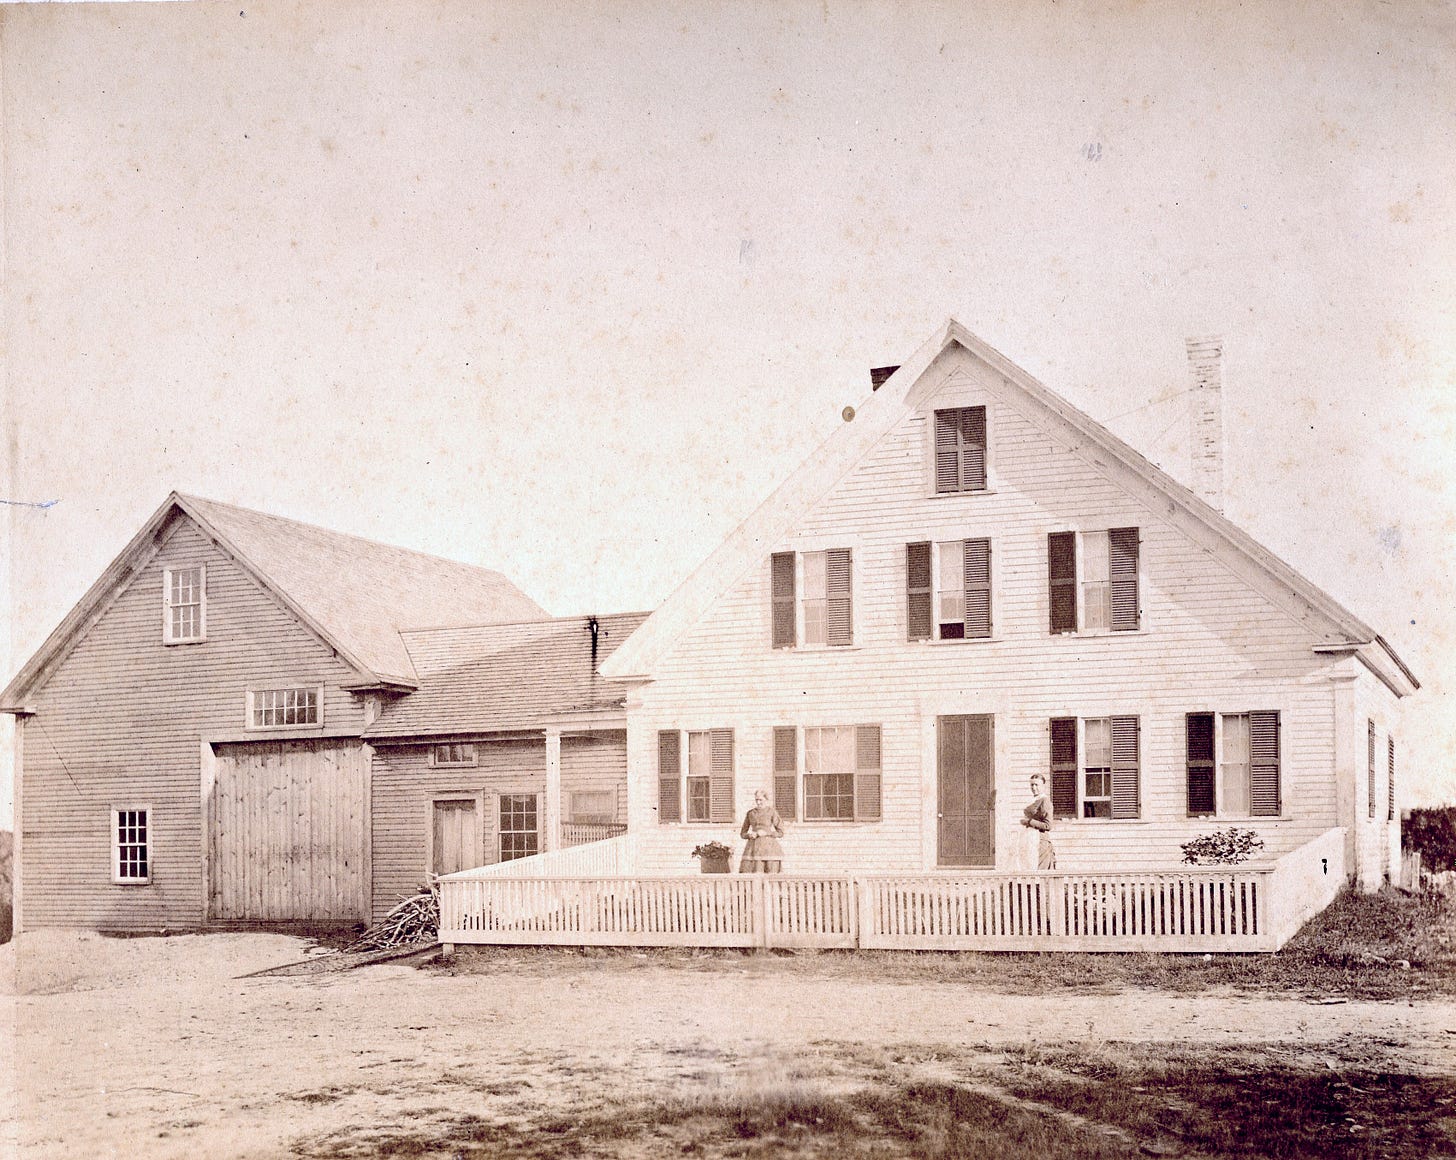 Two women with house and barn